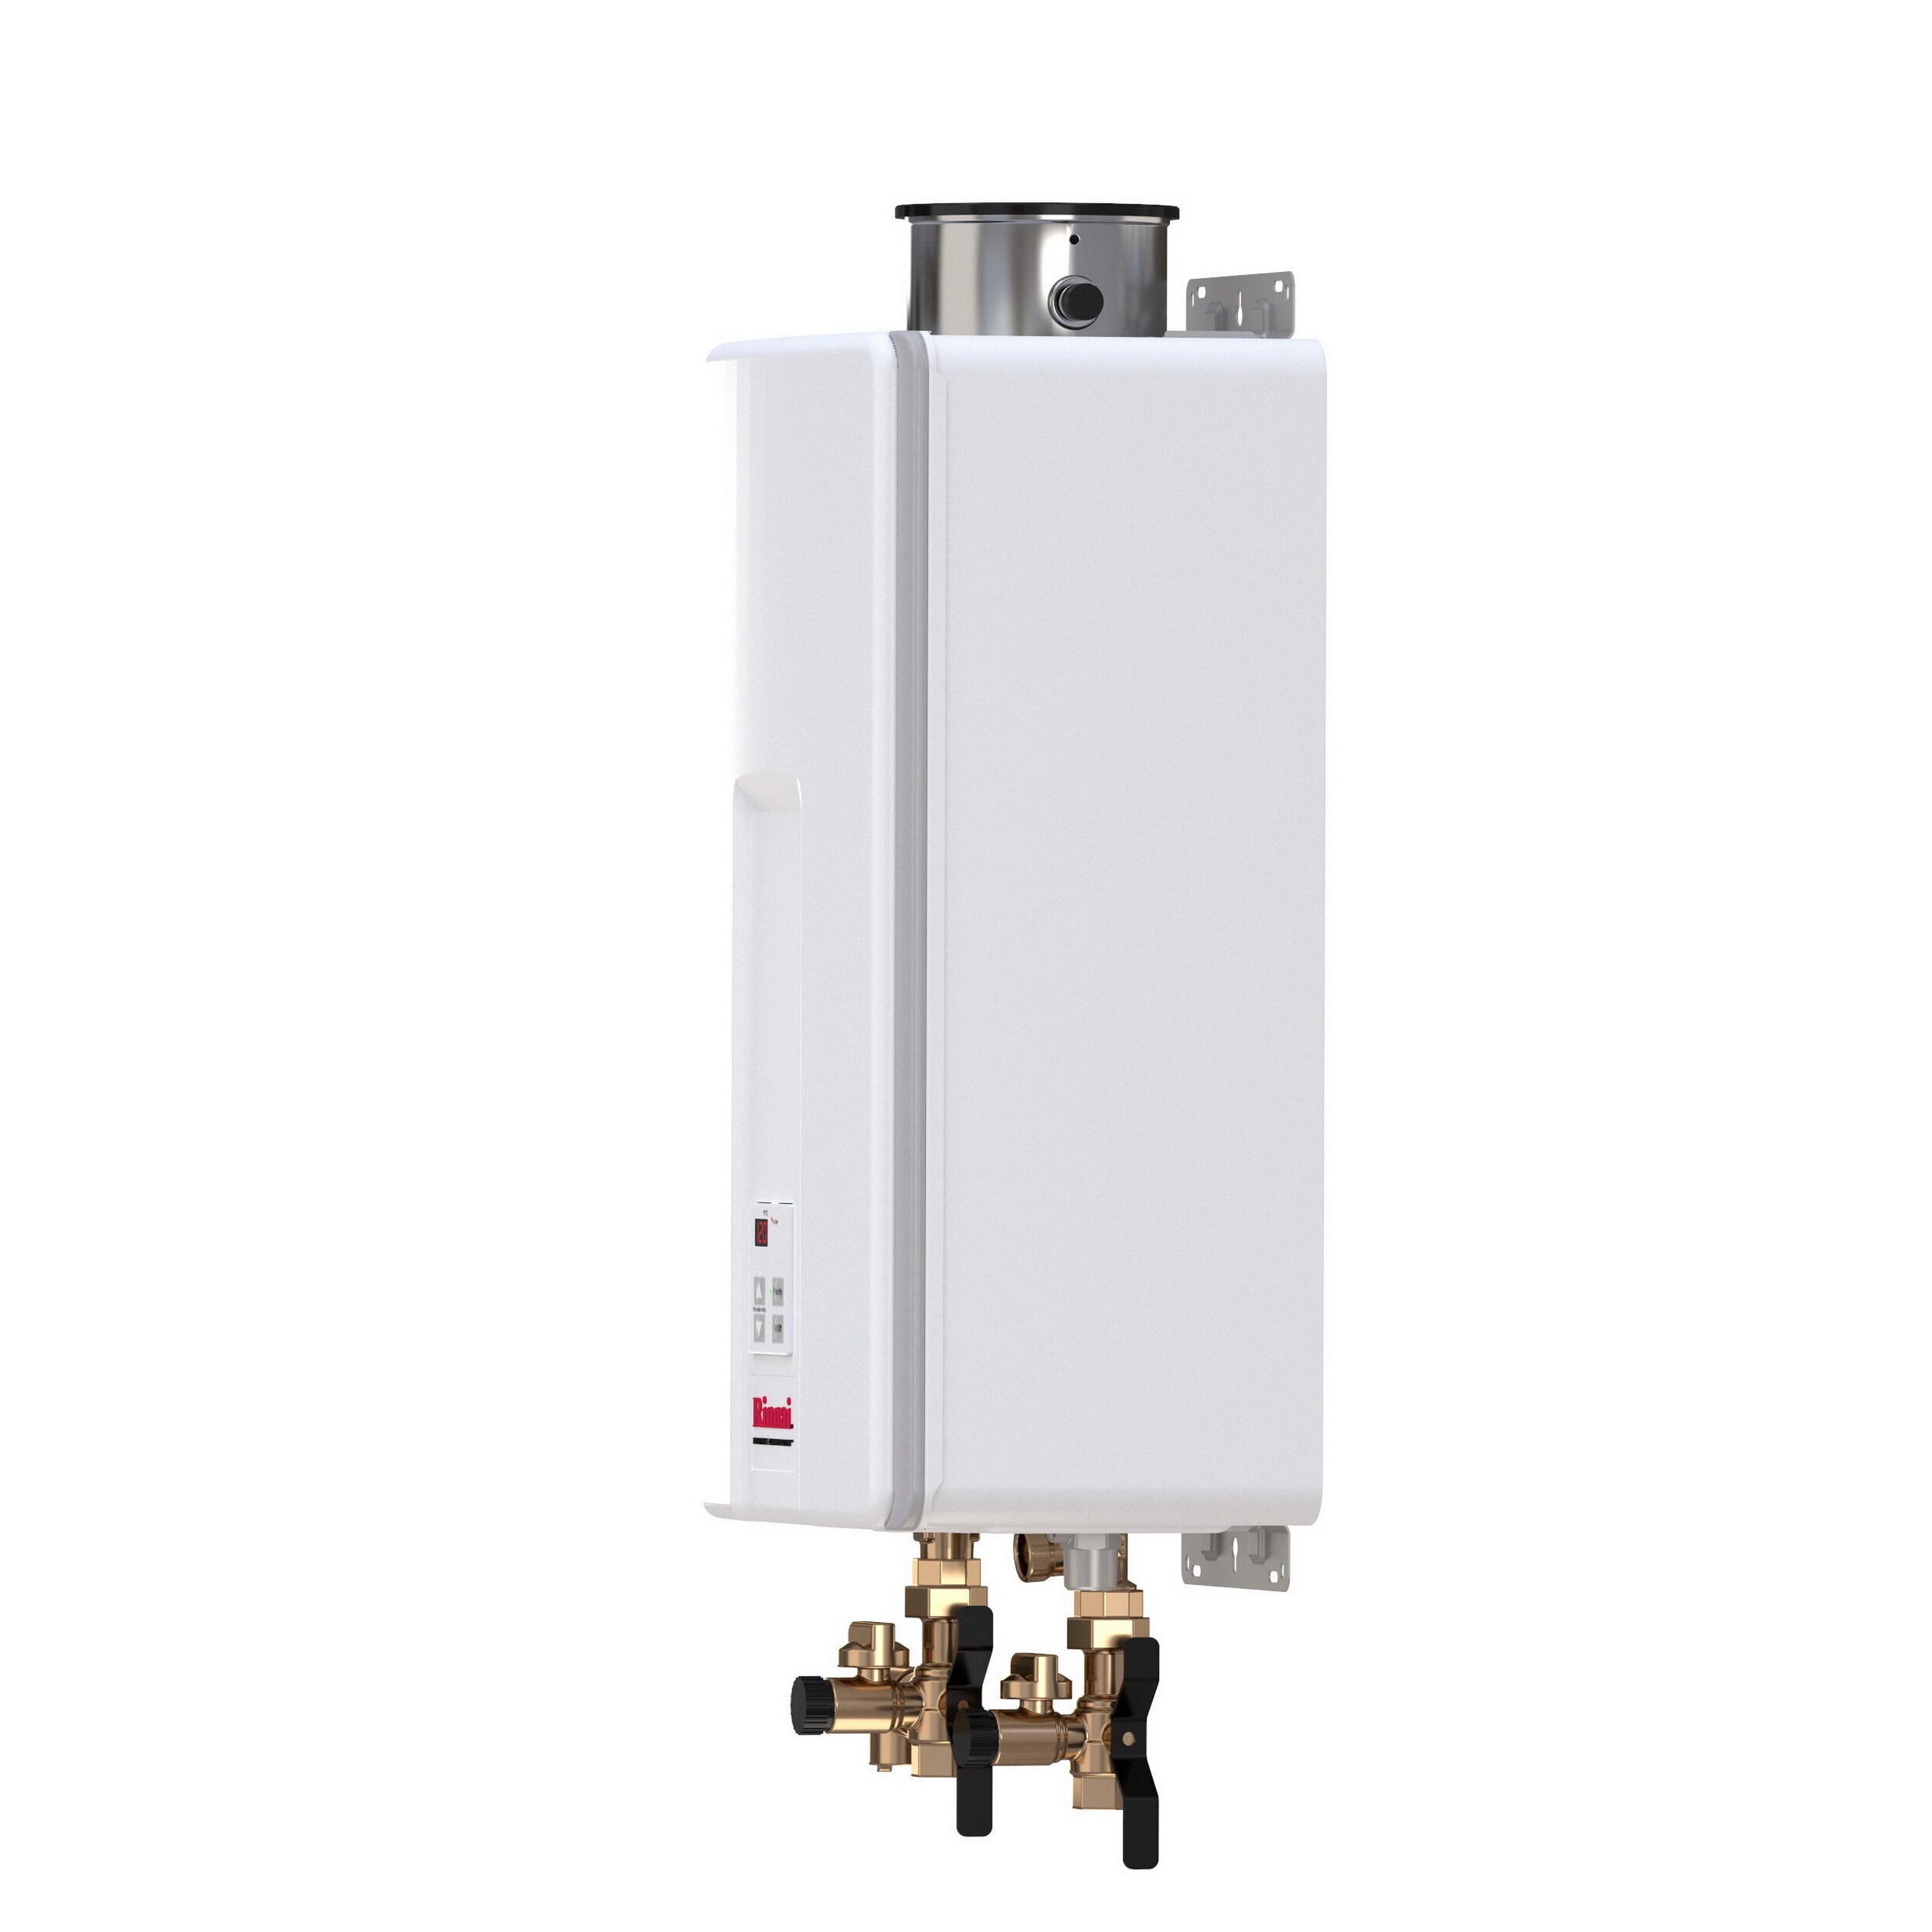 Rinnai Water Heaters at Lowes.com